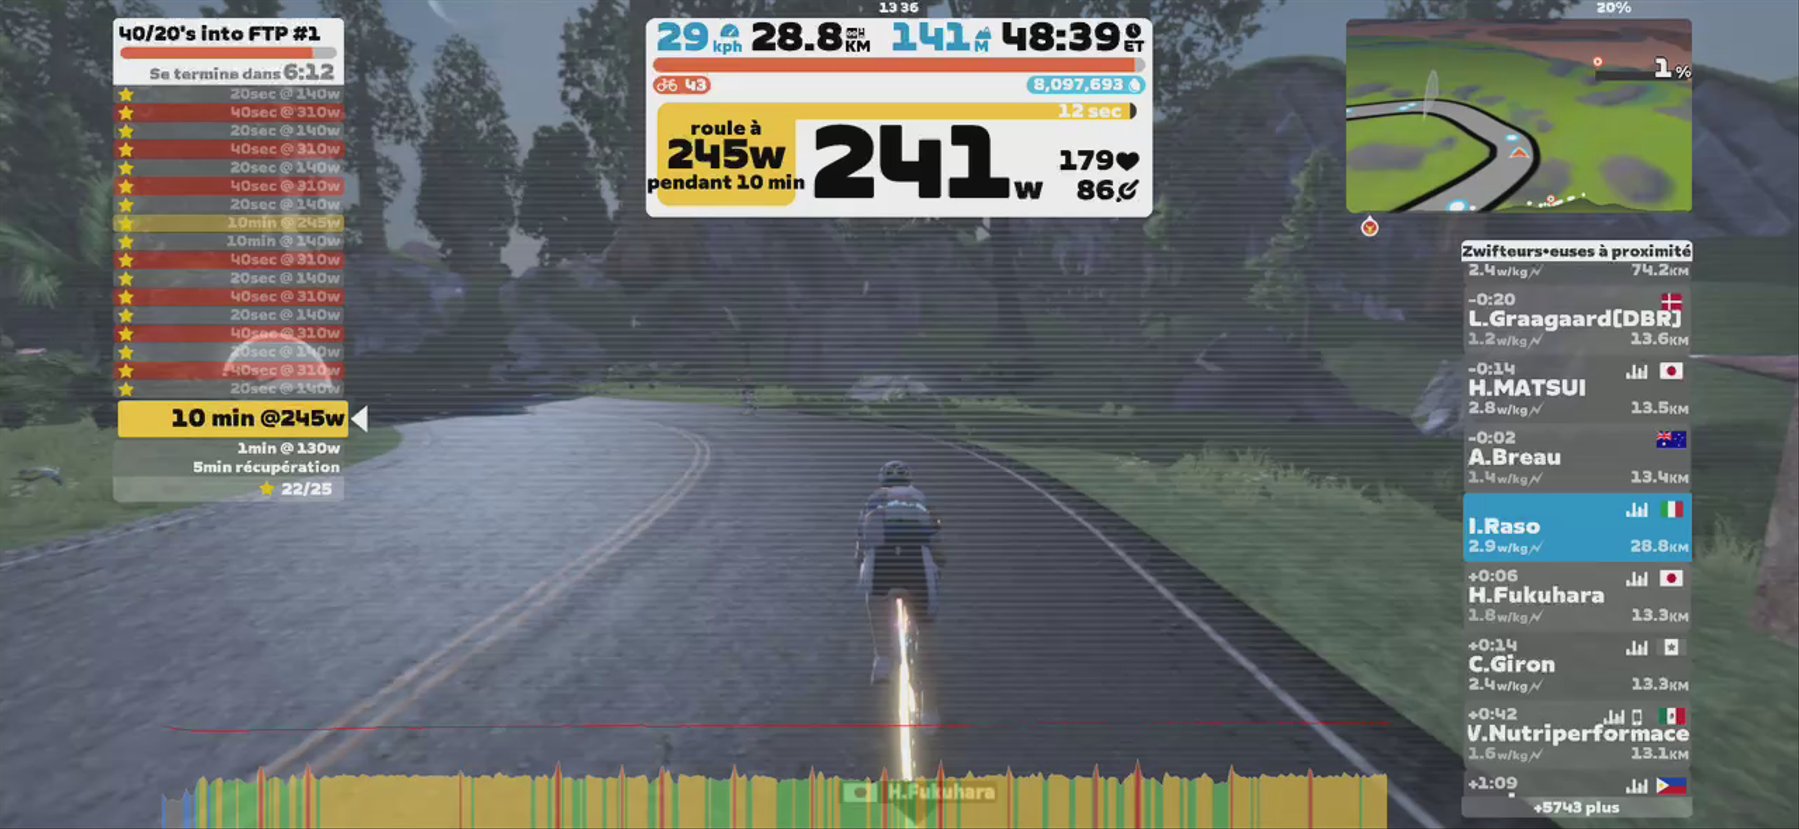 Zwift - 40/20's into FTP #1 in Watopia